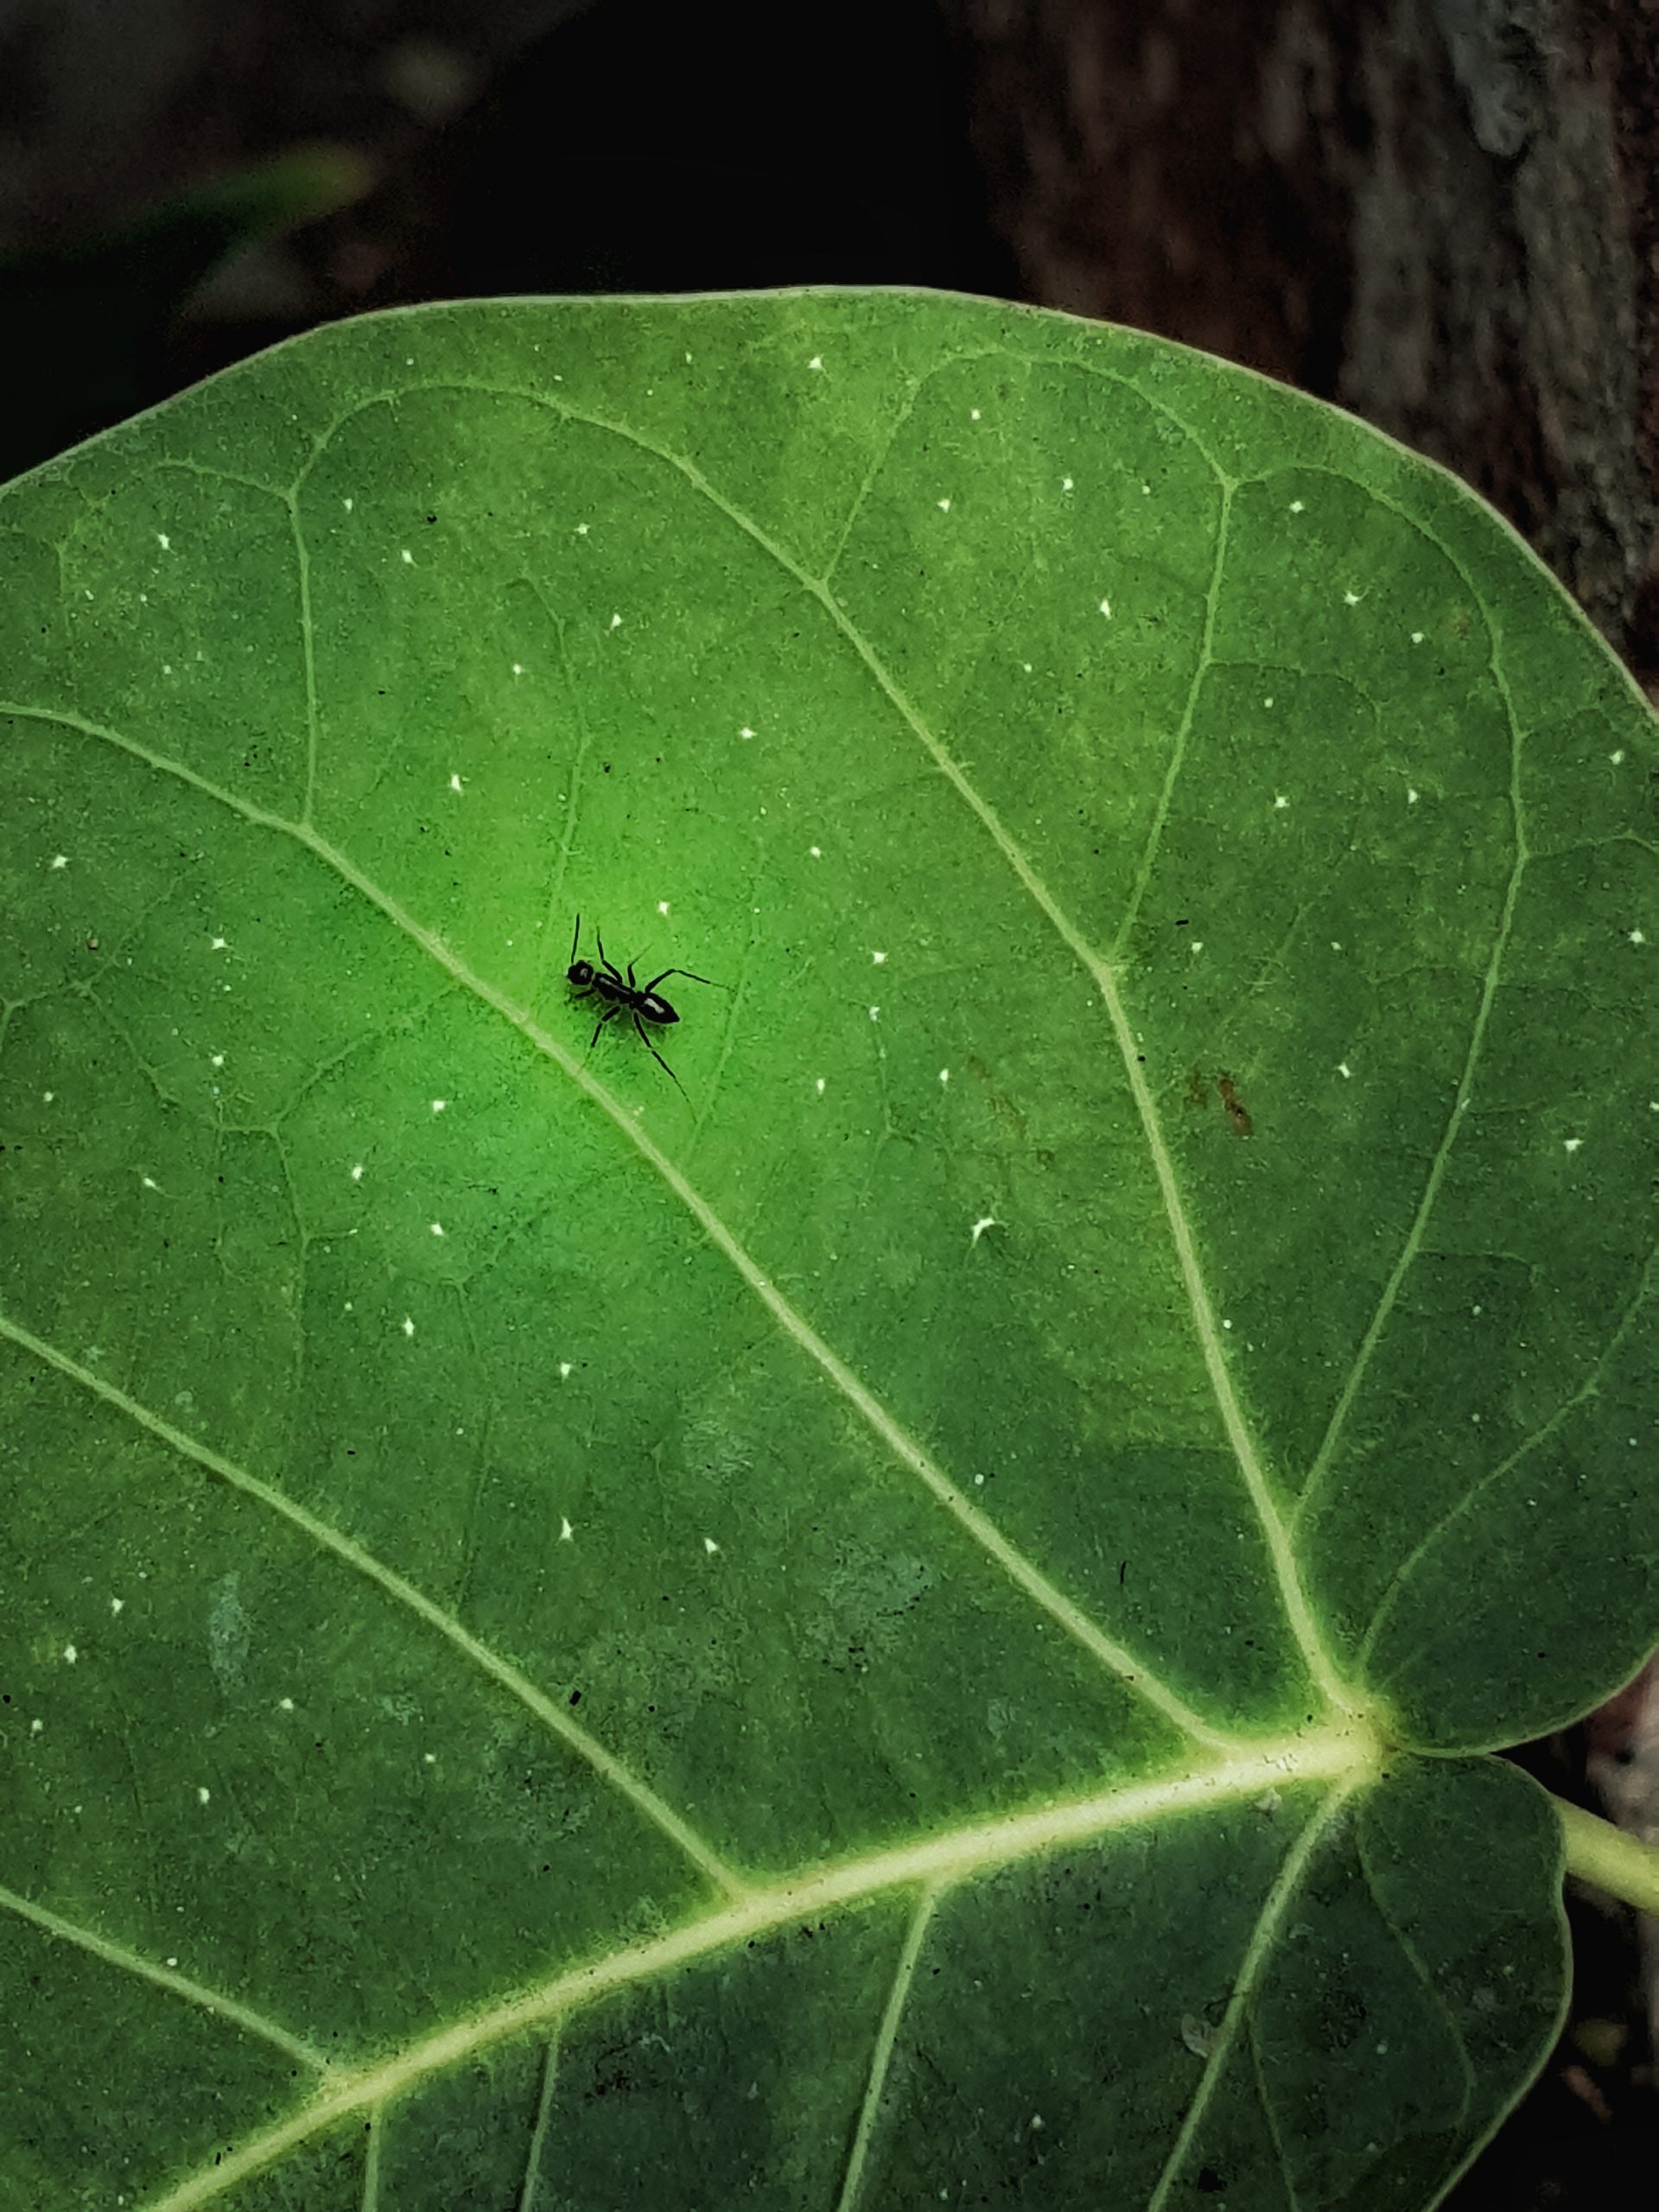 Ant on the leaf